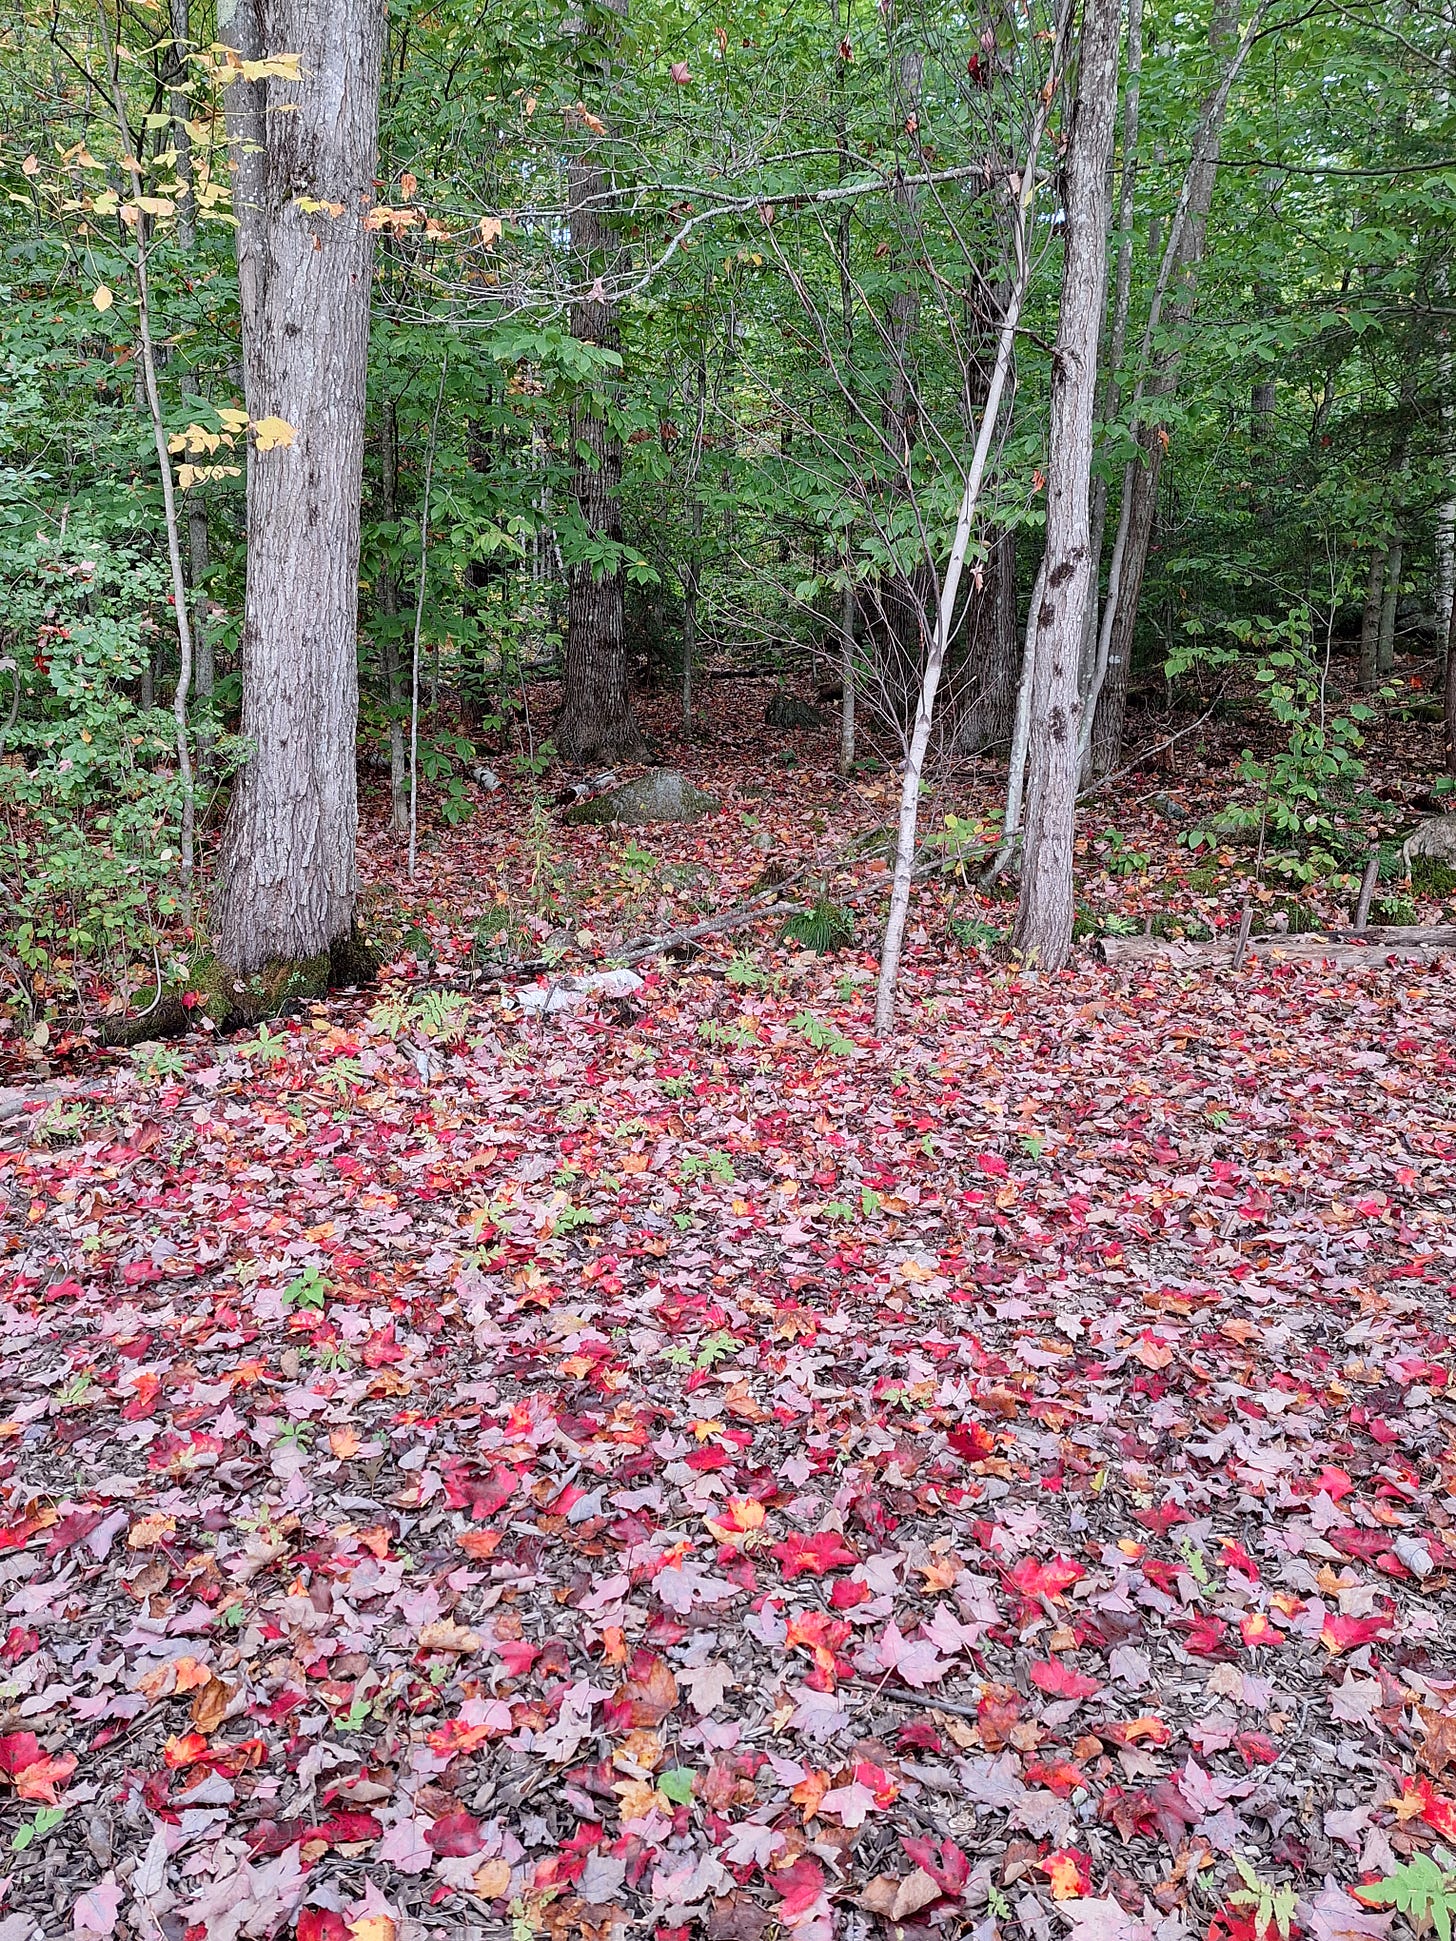 a picture of a carpet of fall leaves in the woods